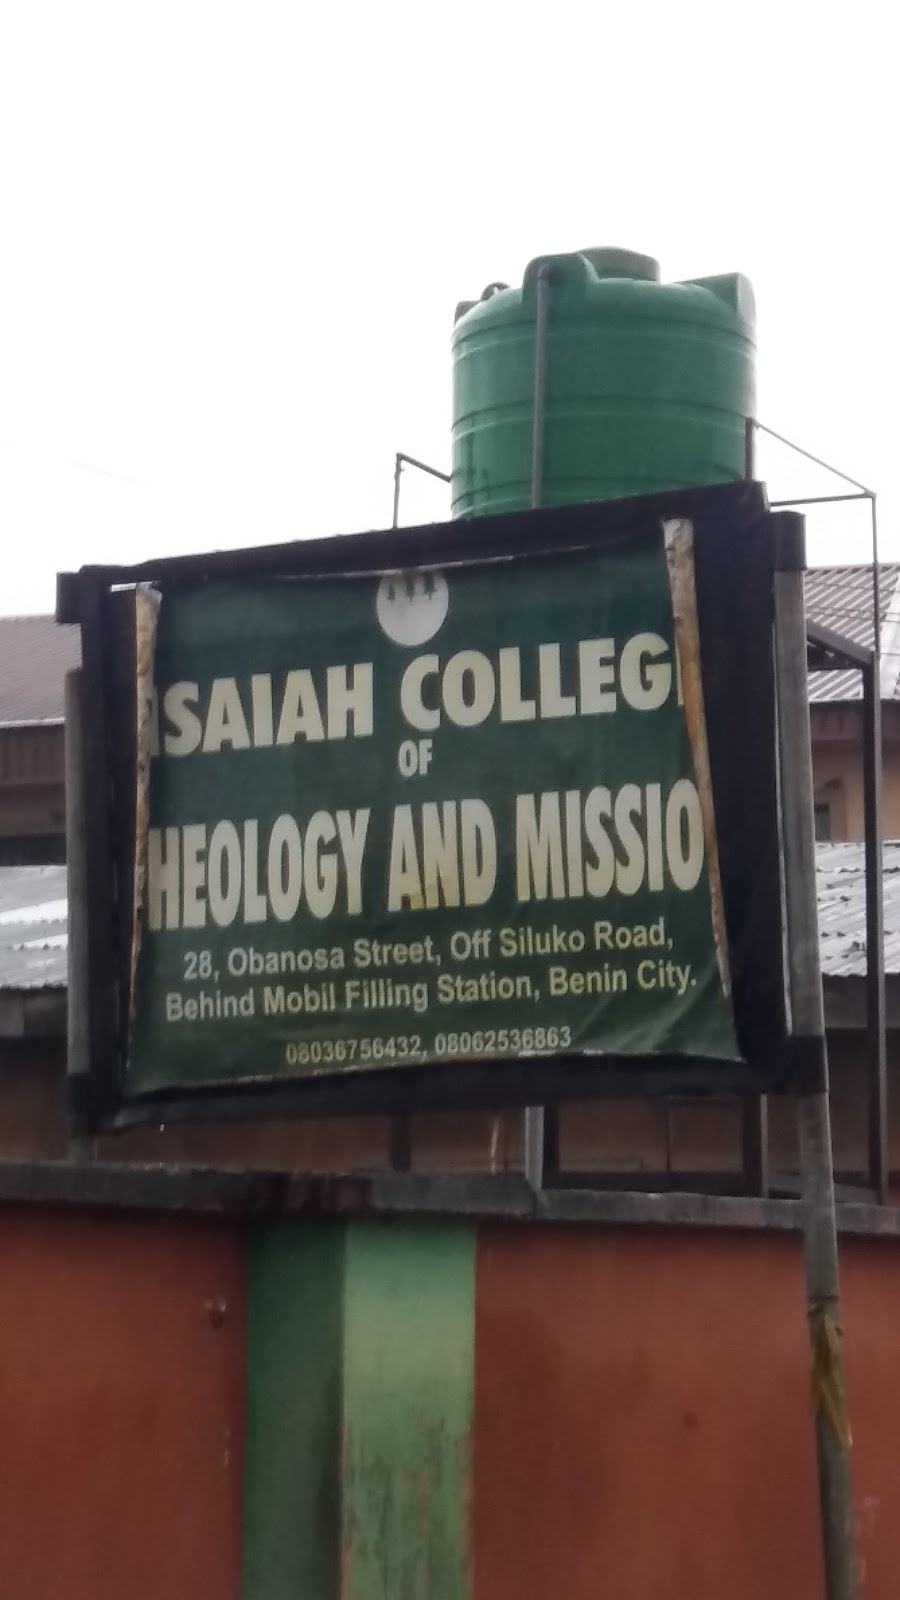 Isaiah College of Theology and Mission